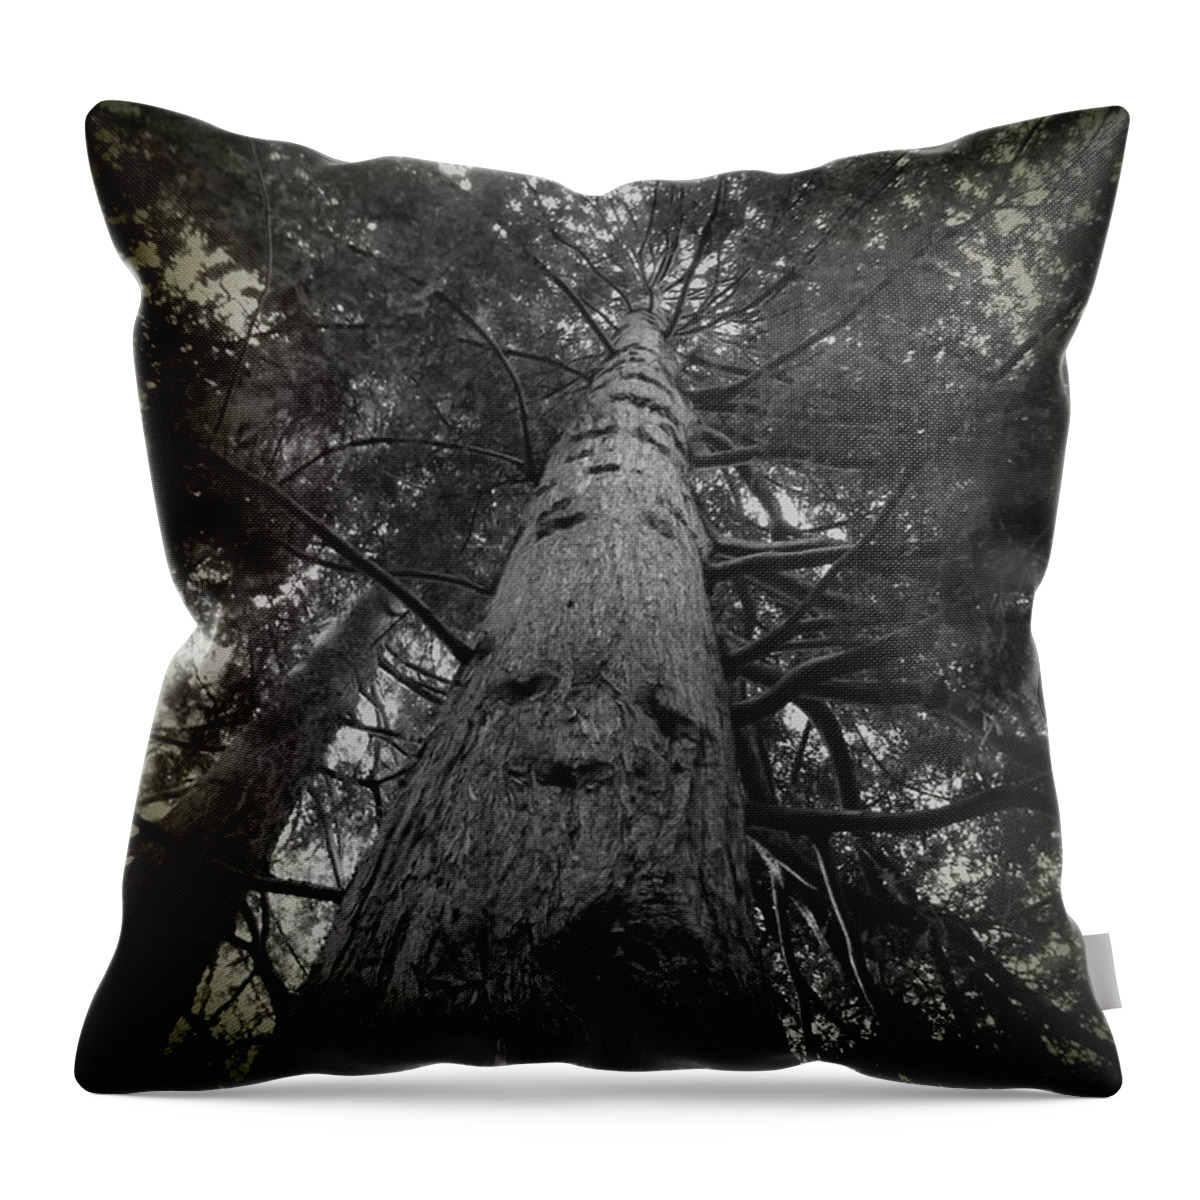 Redwood Tree Throw Pillow featuring the photograph Redwood Tree by Anne Thurston